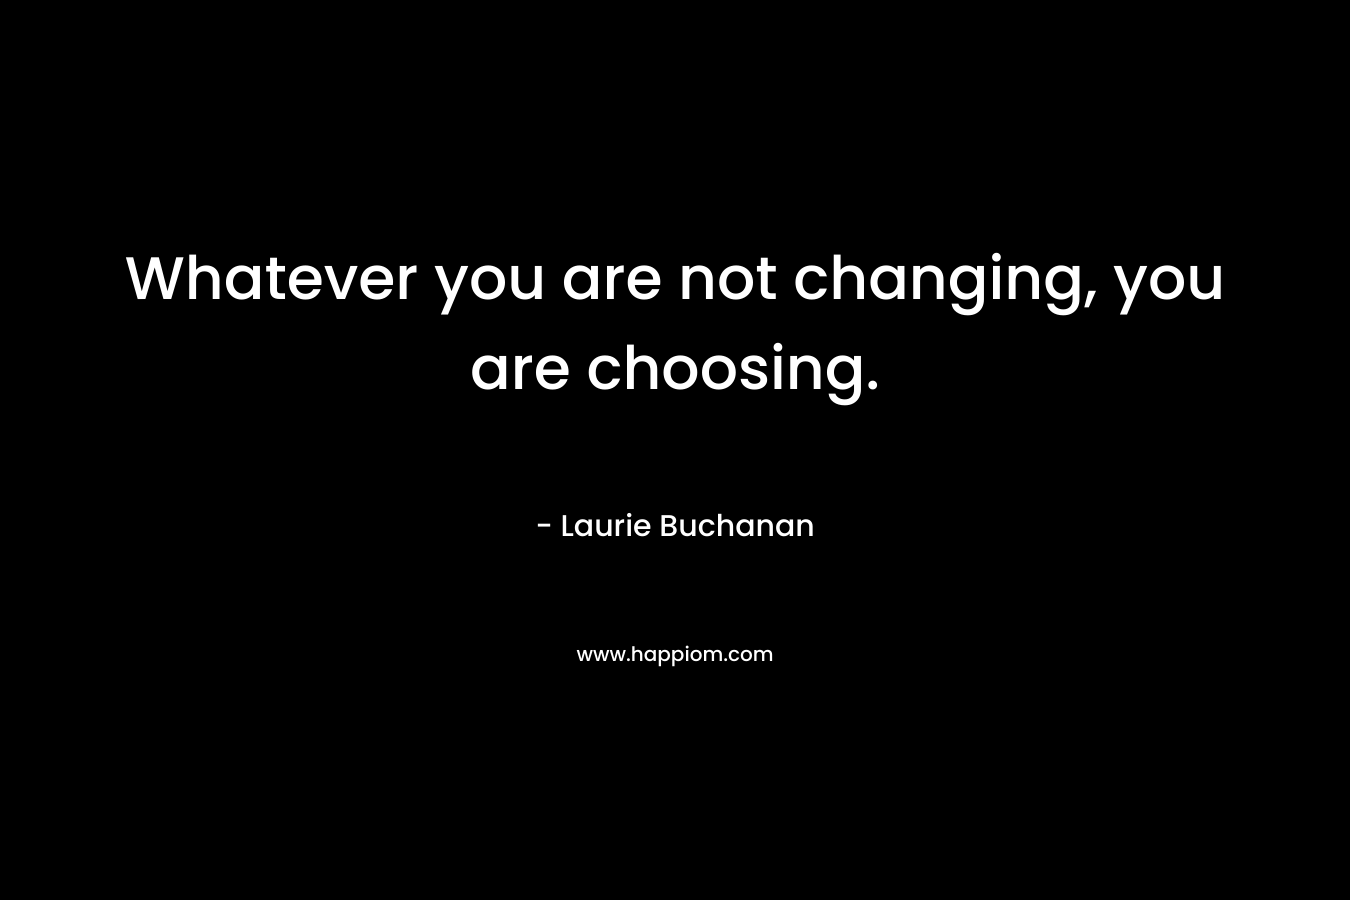 Whatever you are not changing, you are choosing.